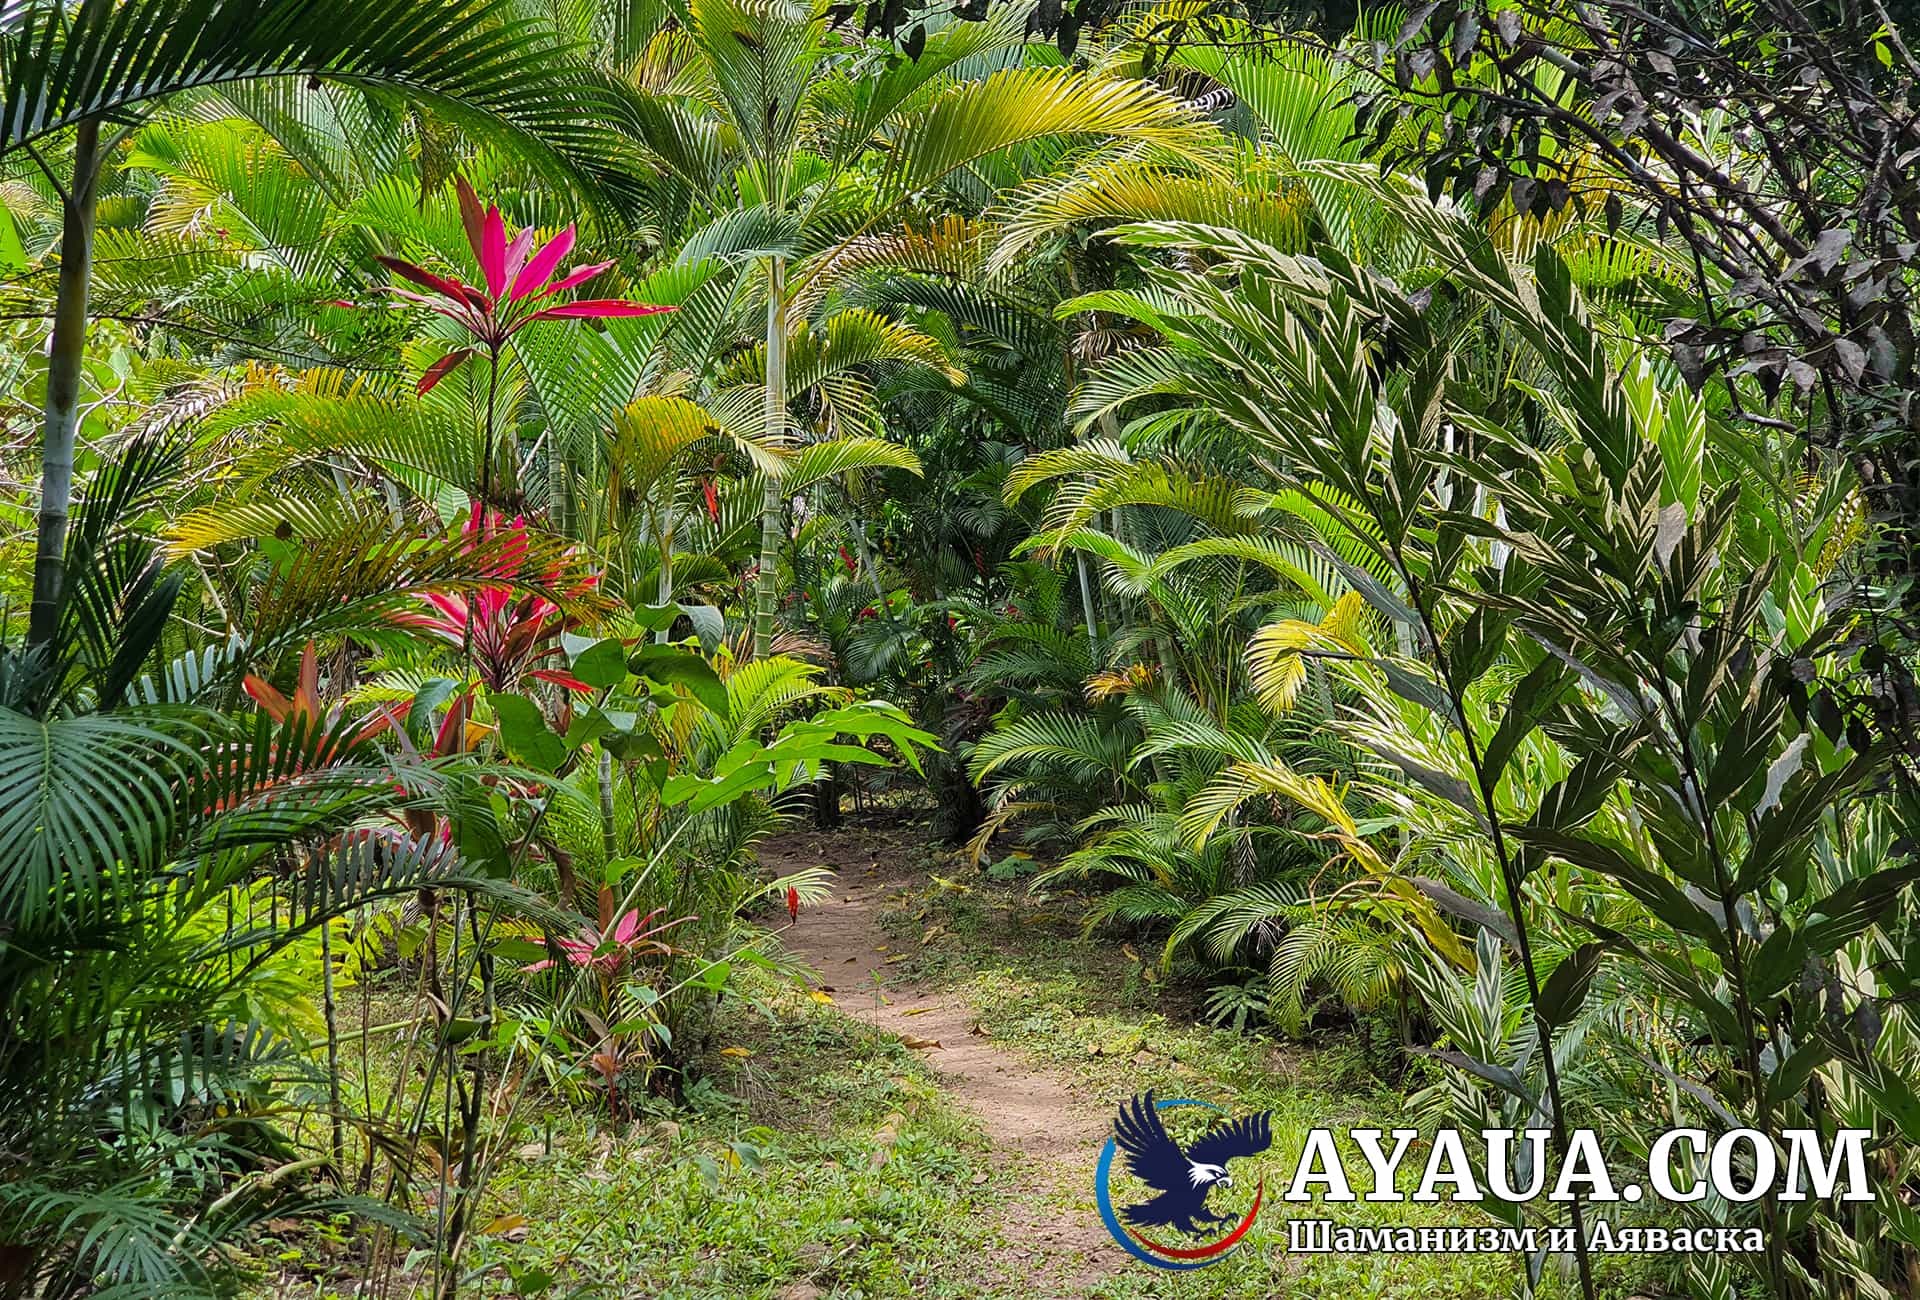 A tropical garden where I was rethinking my life after strong Ayahuasca ceremonies.